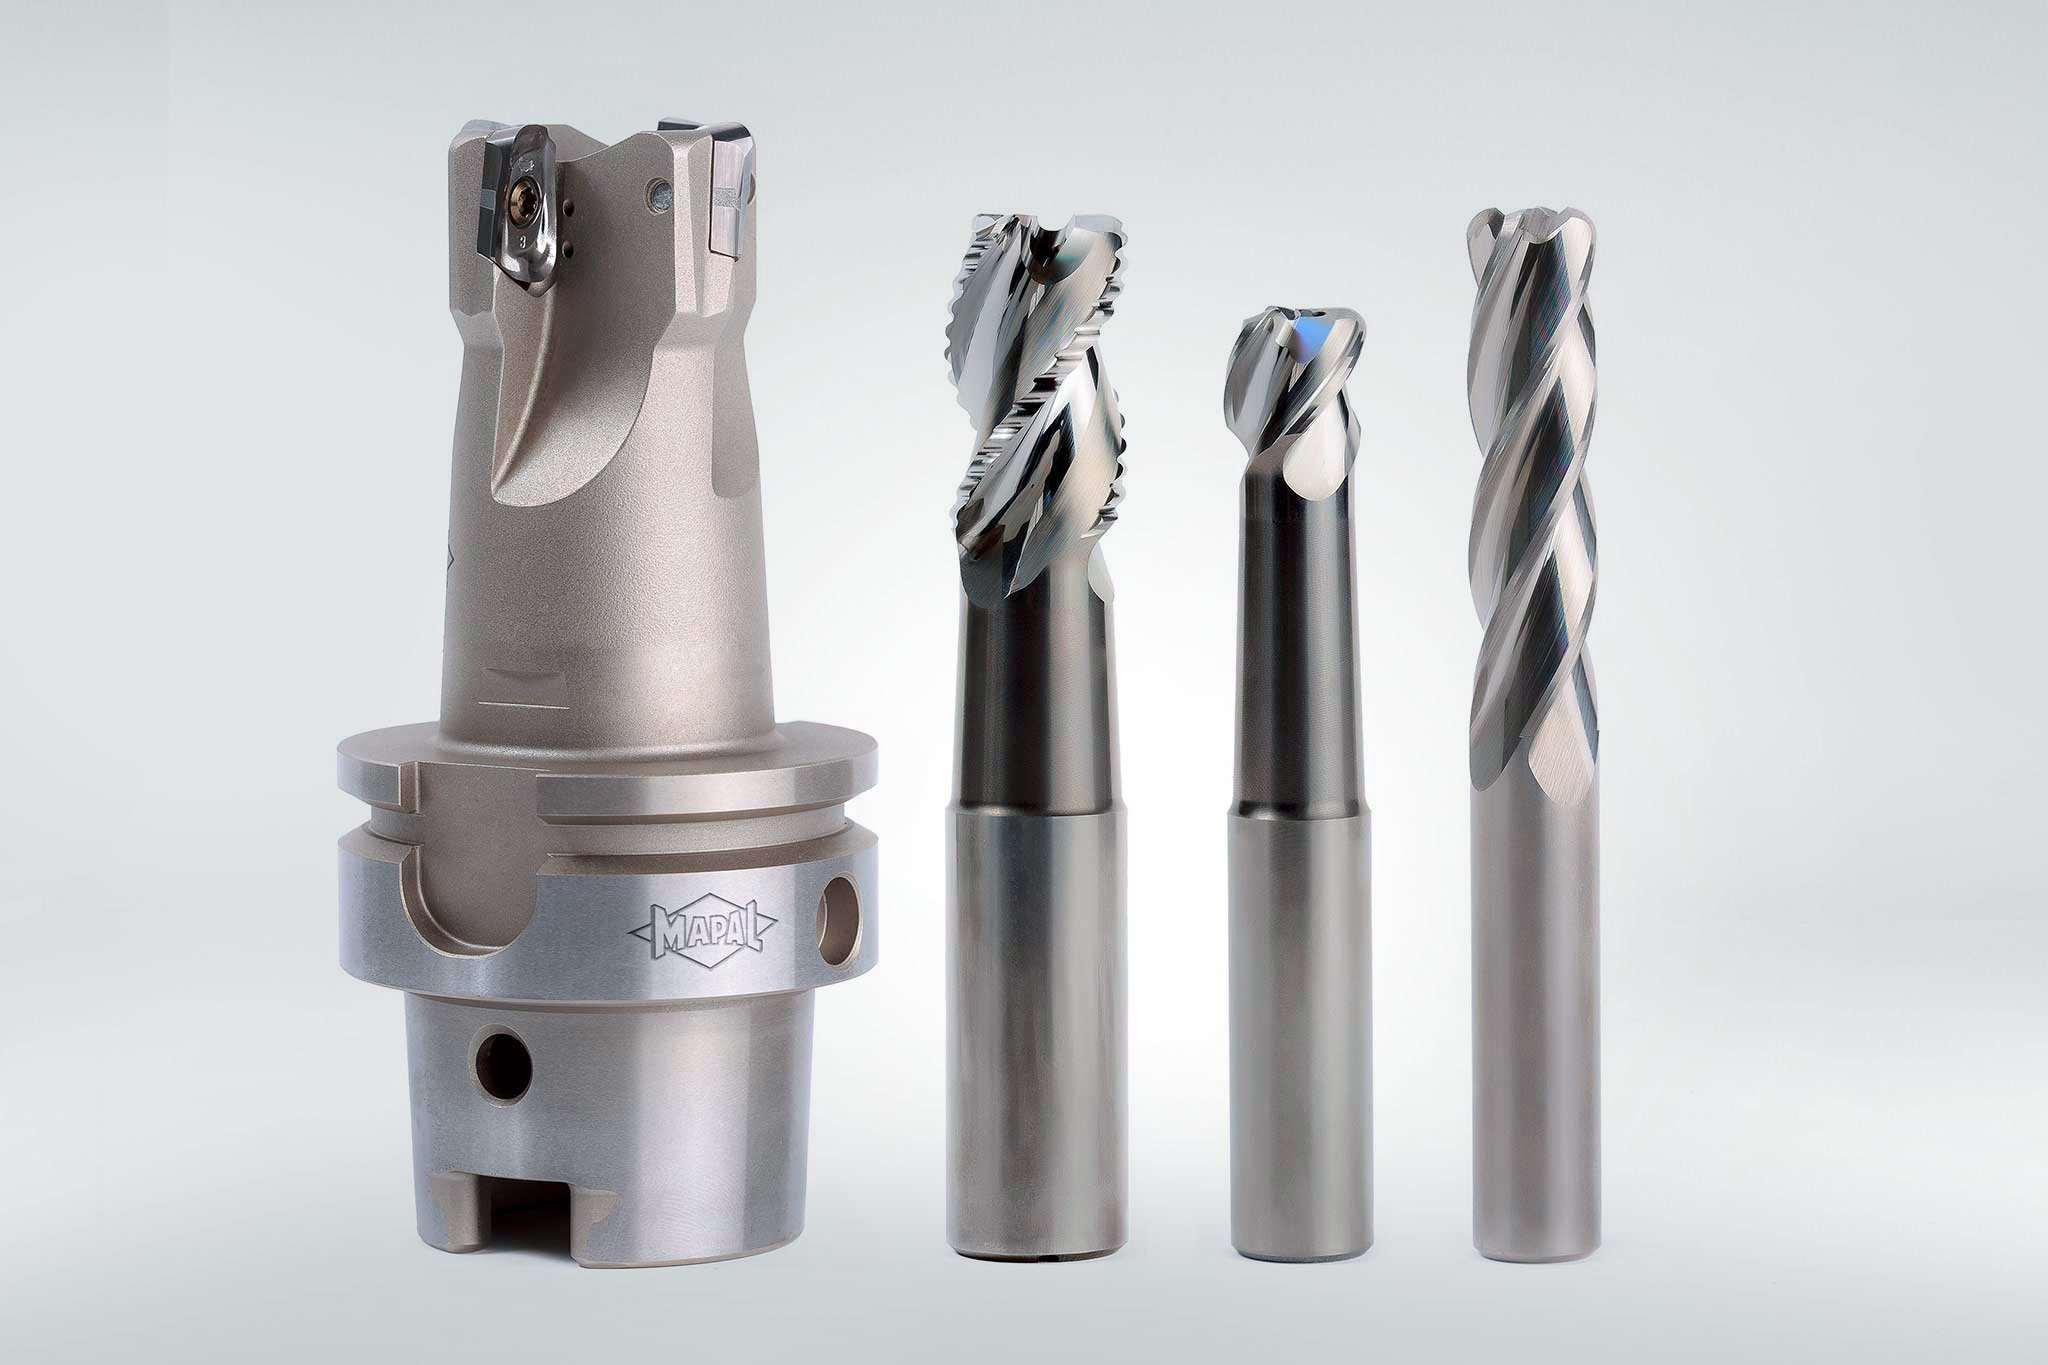 Four stationary milling tools for roughing, semi-finishing and finishing.